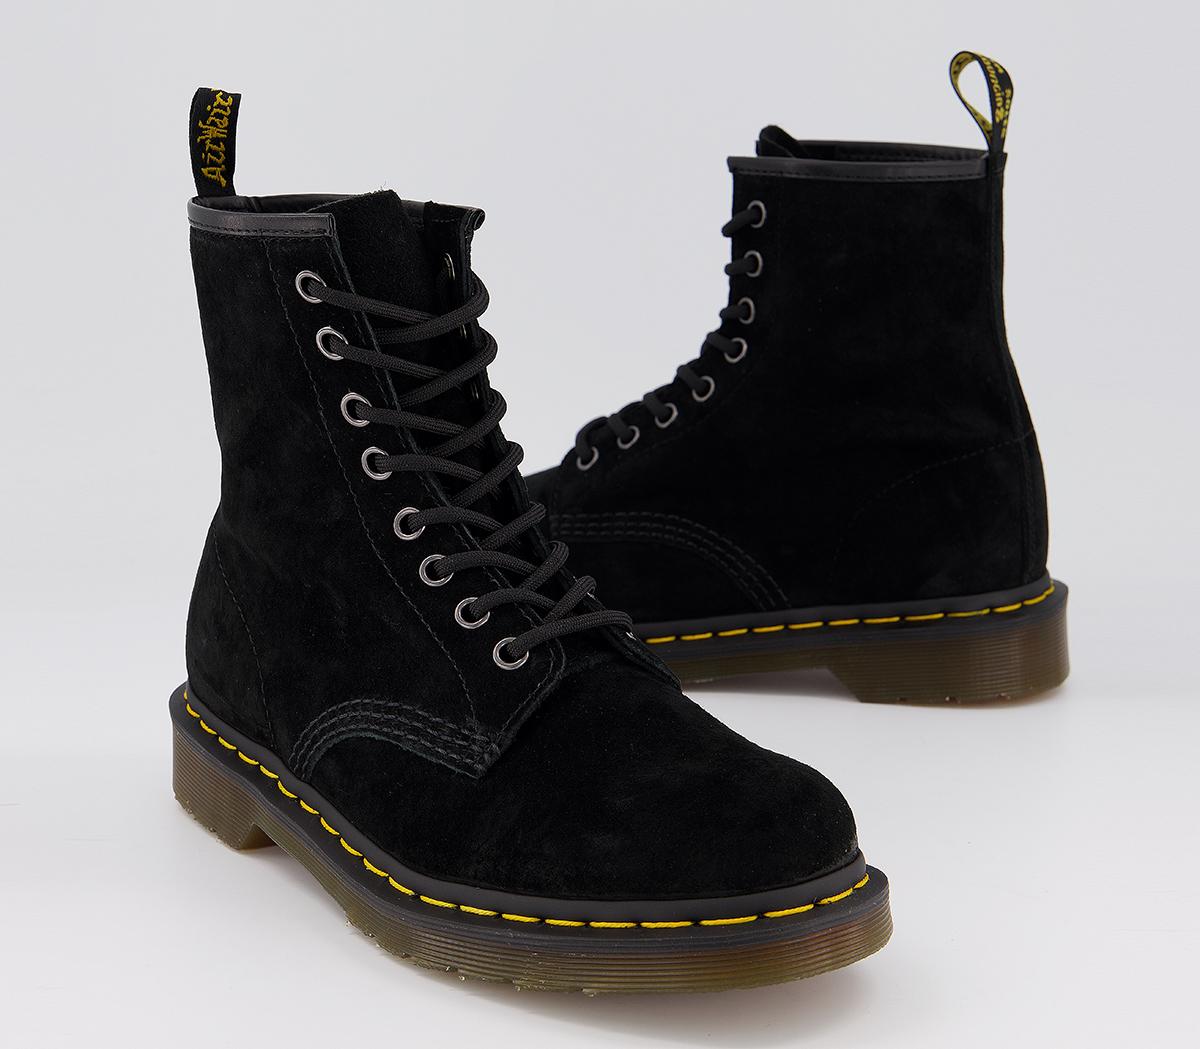 Dr. Martens 8 Eyelet Lace Up Boots Black Suede - Ankle Boots